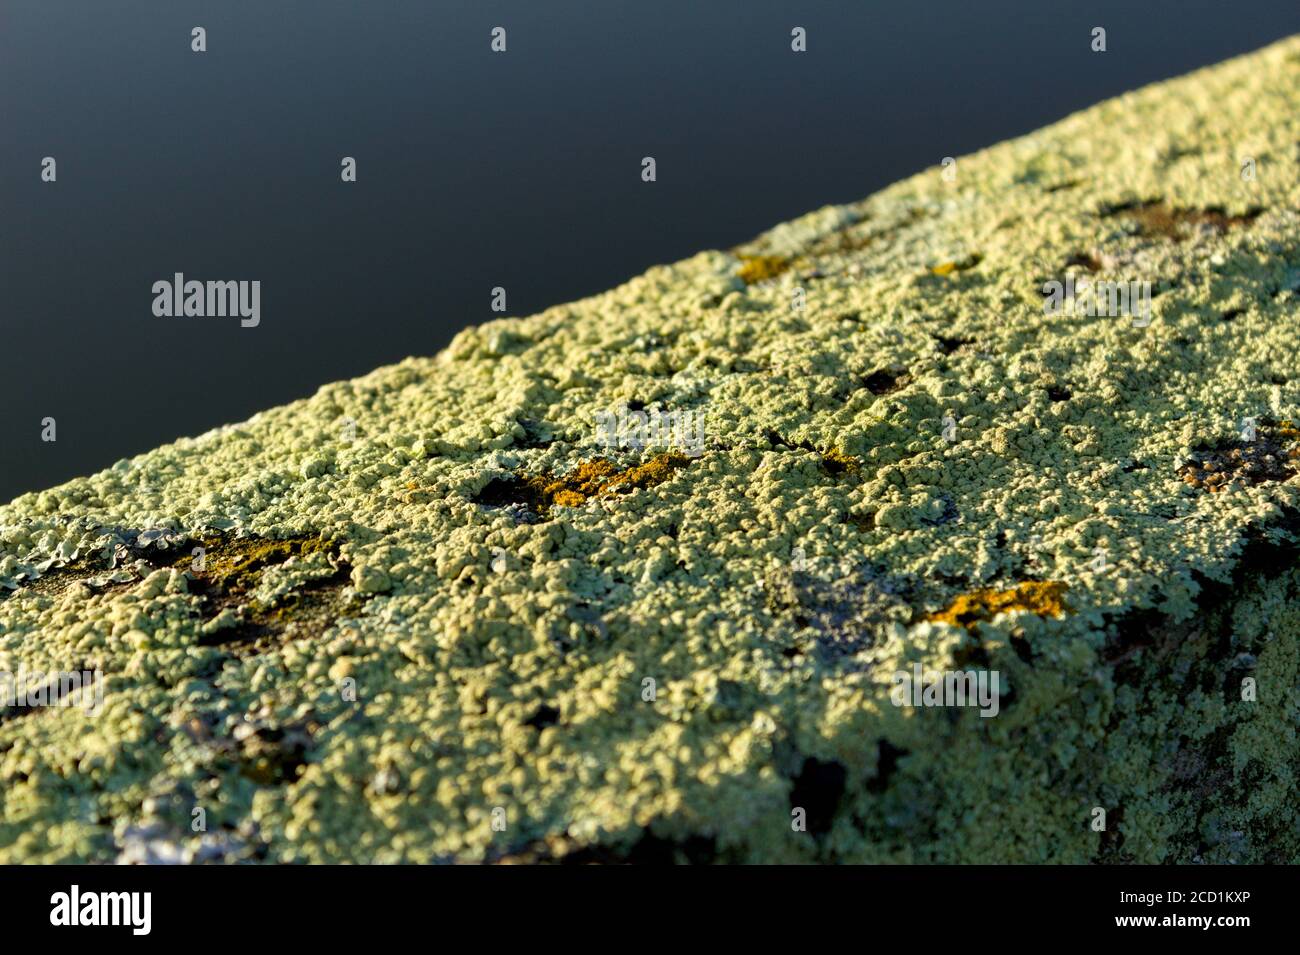 lichen growing on a wooden bream Stock Photo